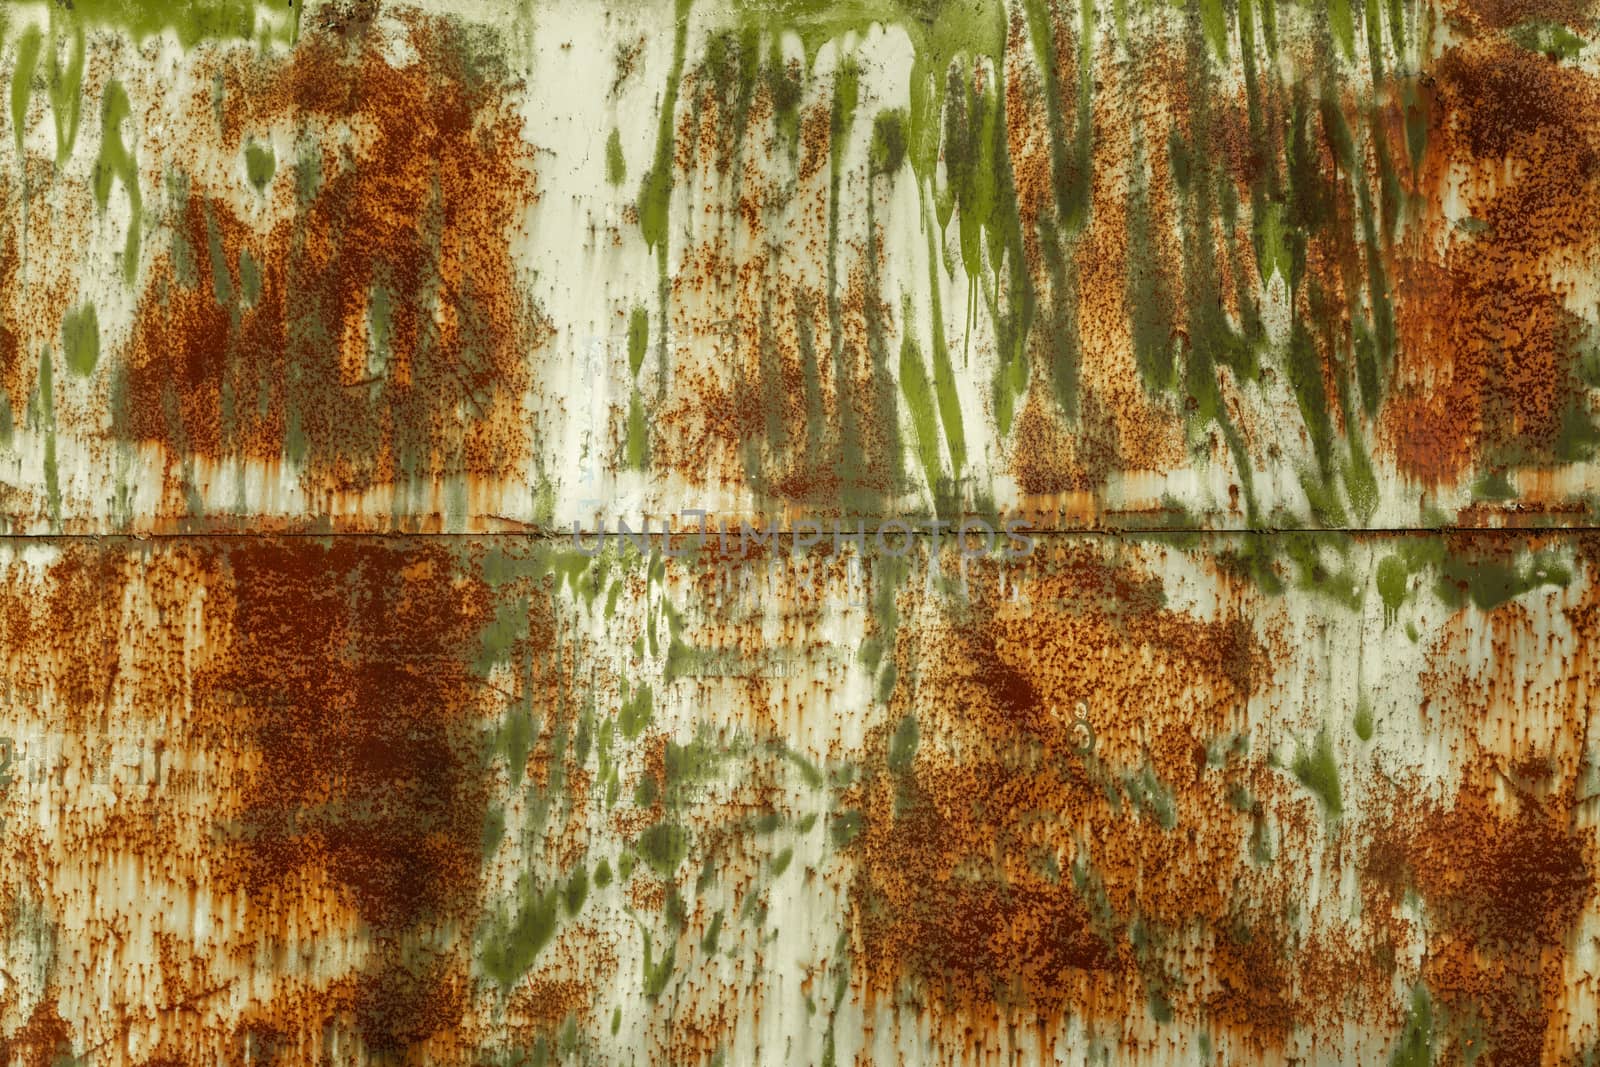 Rusty metal texture as background by svedoliver